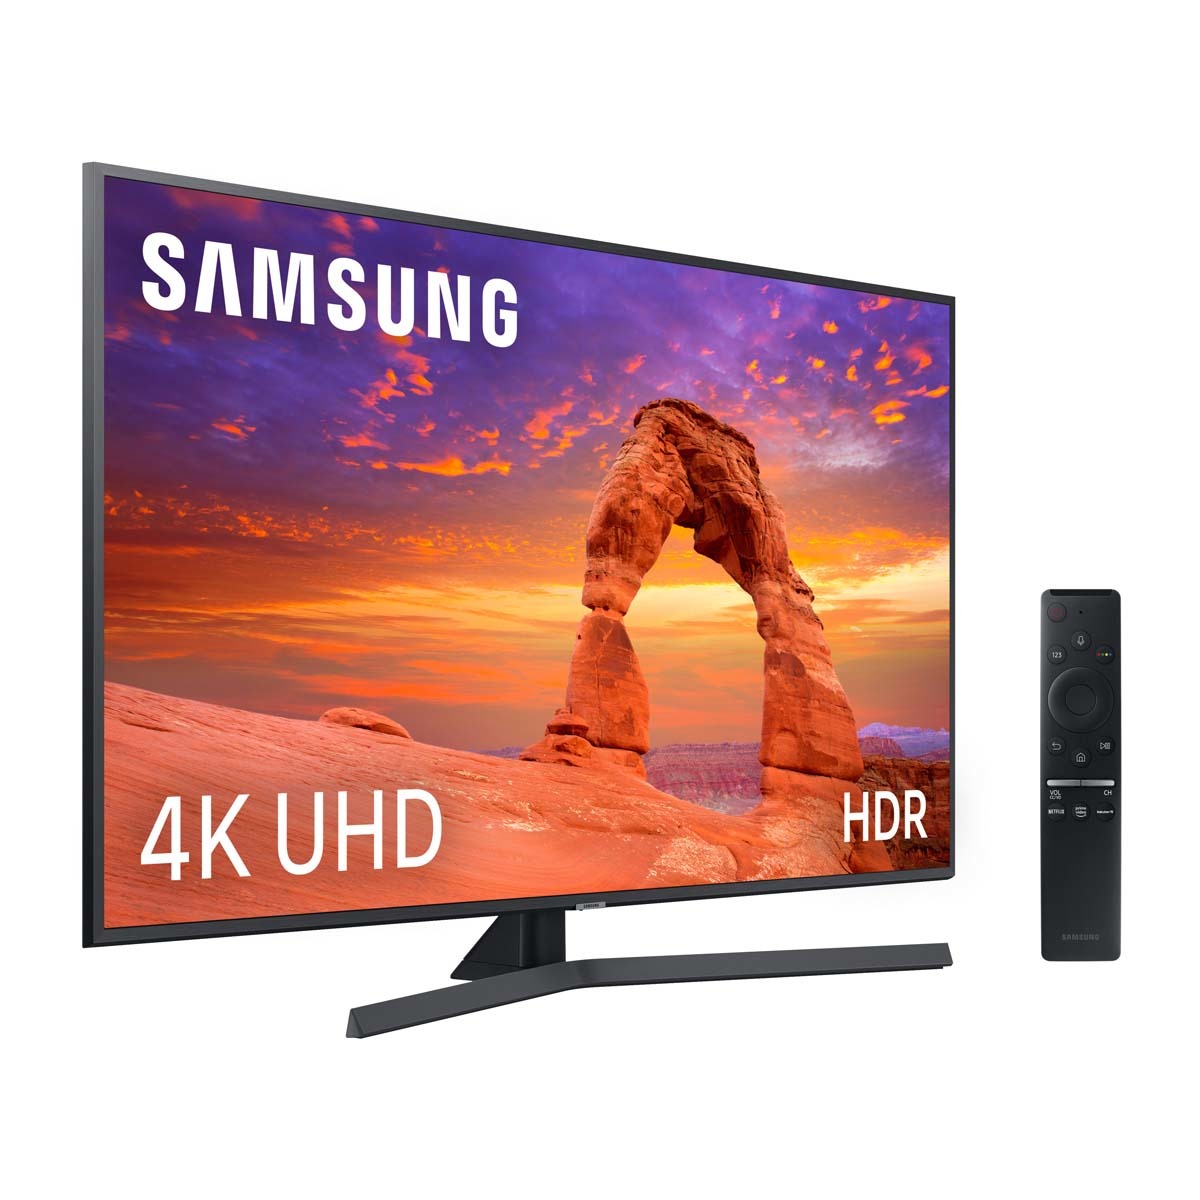 TV LED 55" - Samsung 55RU7405, 4K UHD Real, HDR, Smart TV, Ultra Dimming, One Remote Control